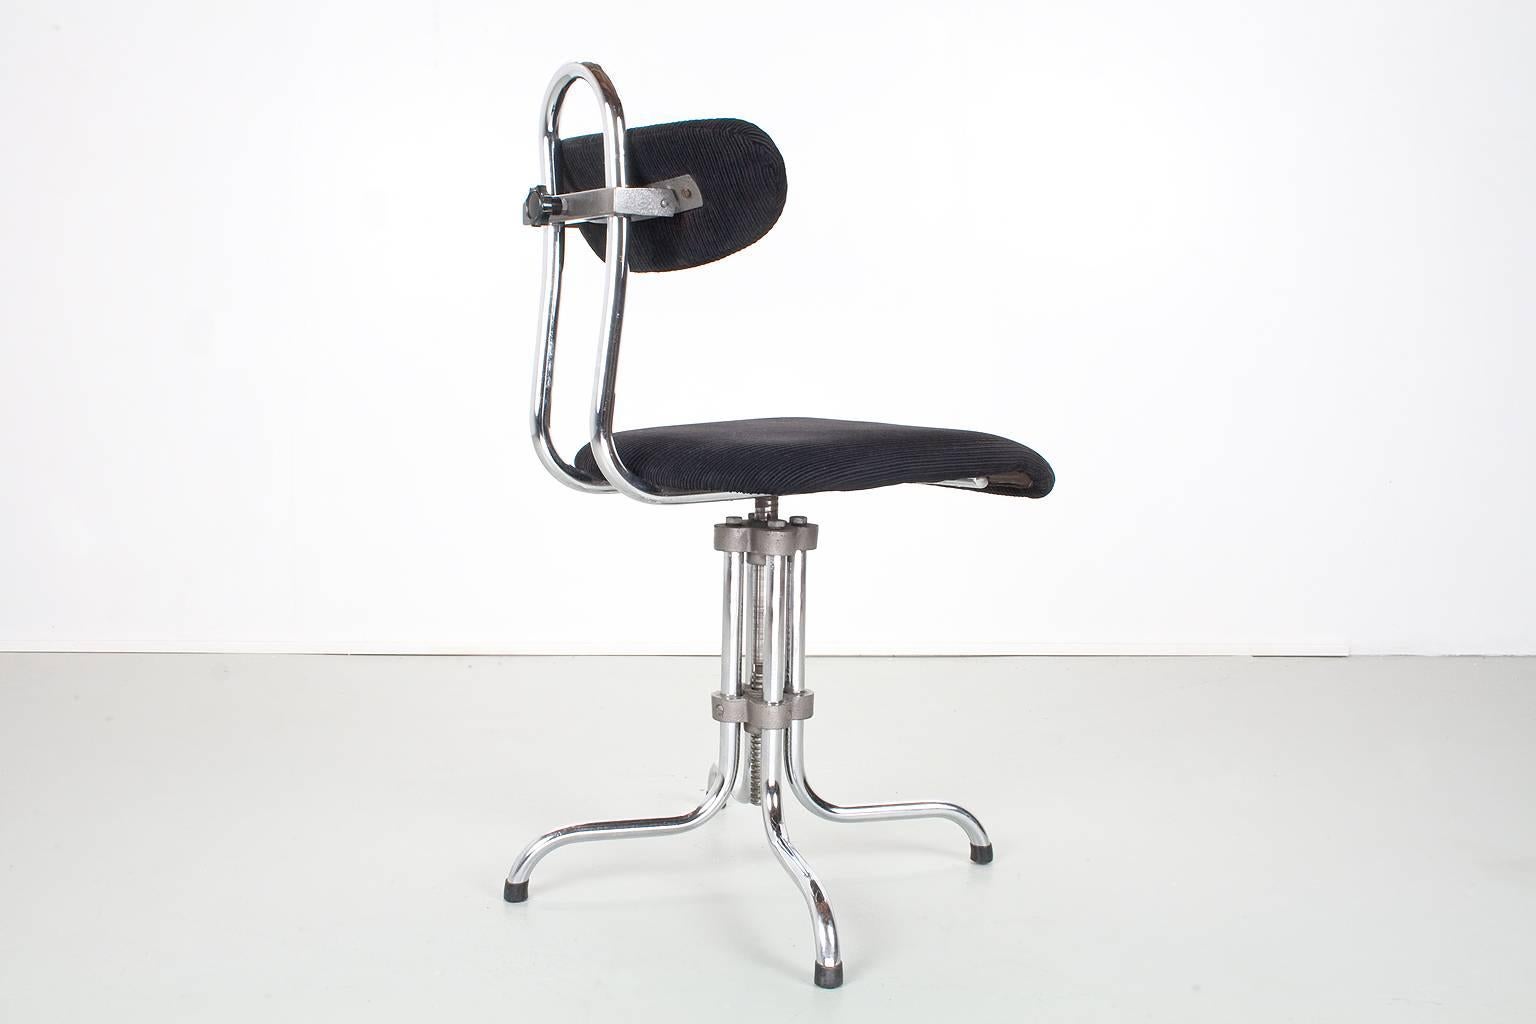 In height adjustable 1933 swivel typewriter or office chair designed by W.H. Gispen in the Netherlands. The chassis consists of a standard four-legged column base. The slightly curved backrest can be adjusted in height along a steel back frame. The